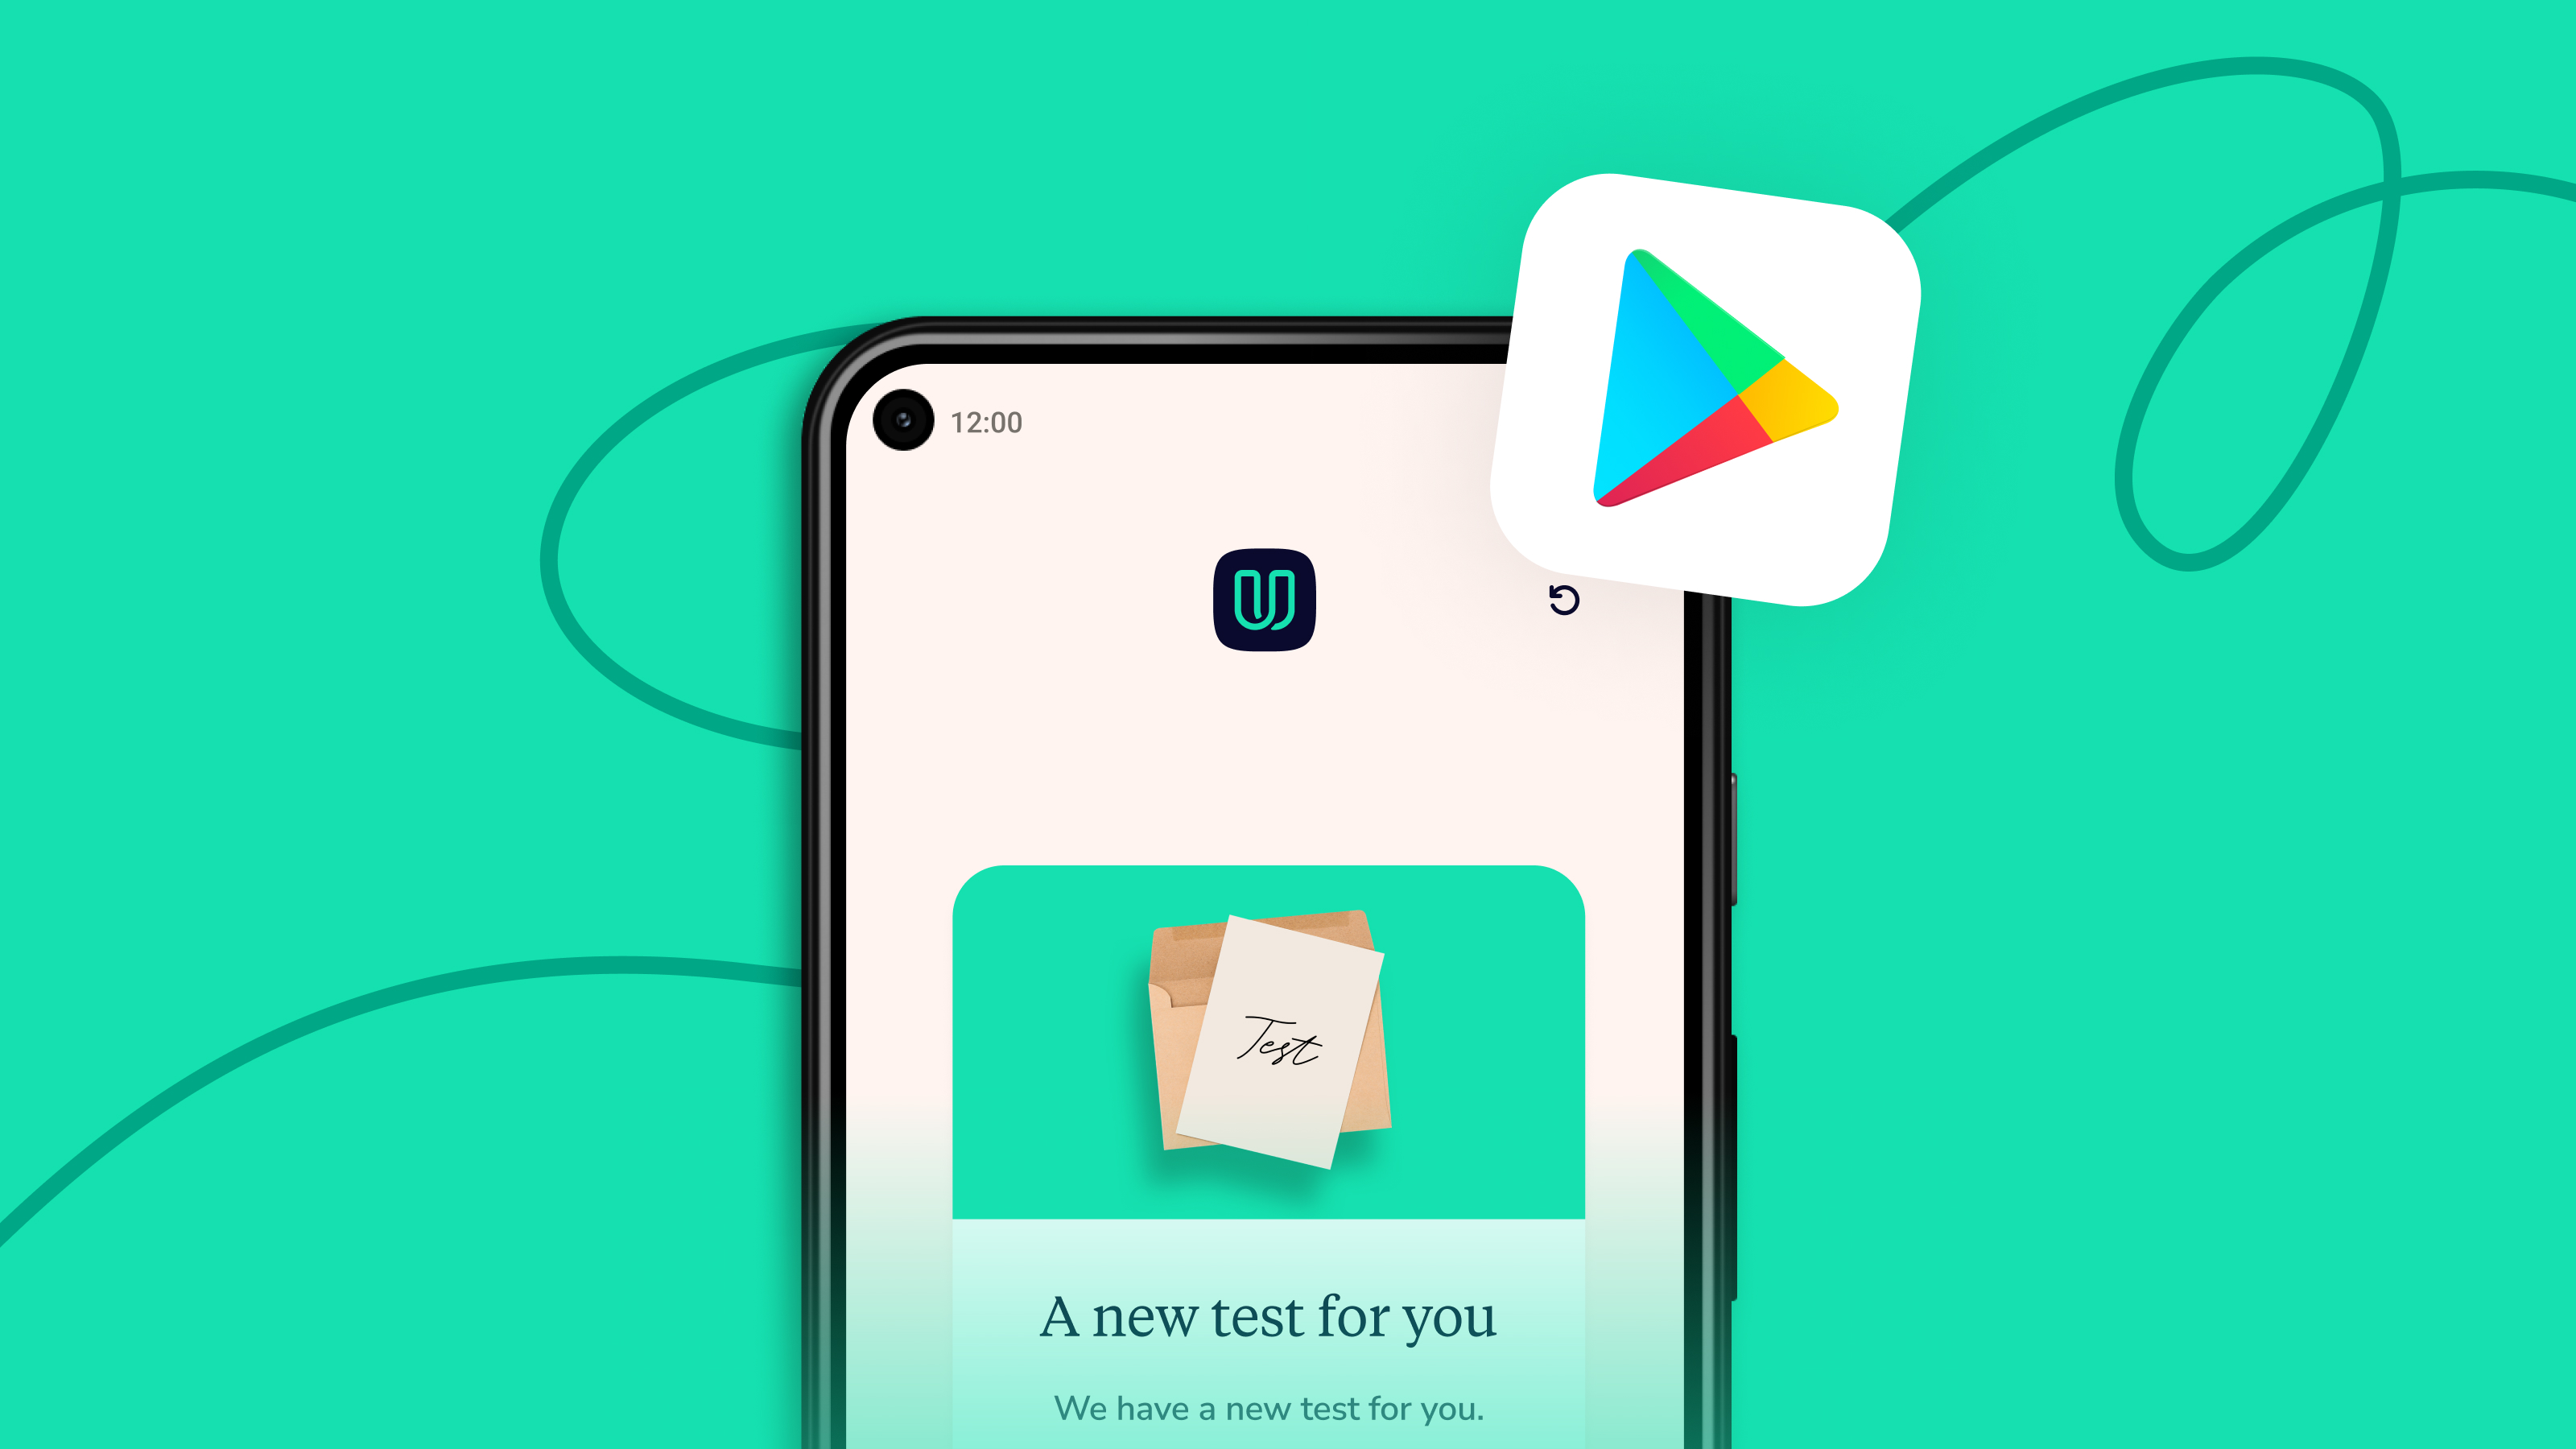 Android user testing - now available at Userbrain